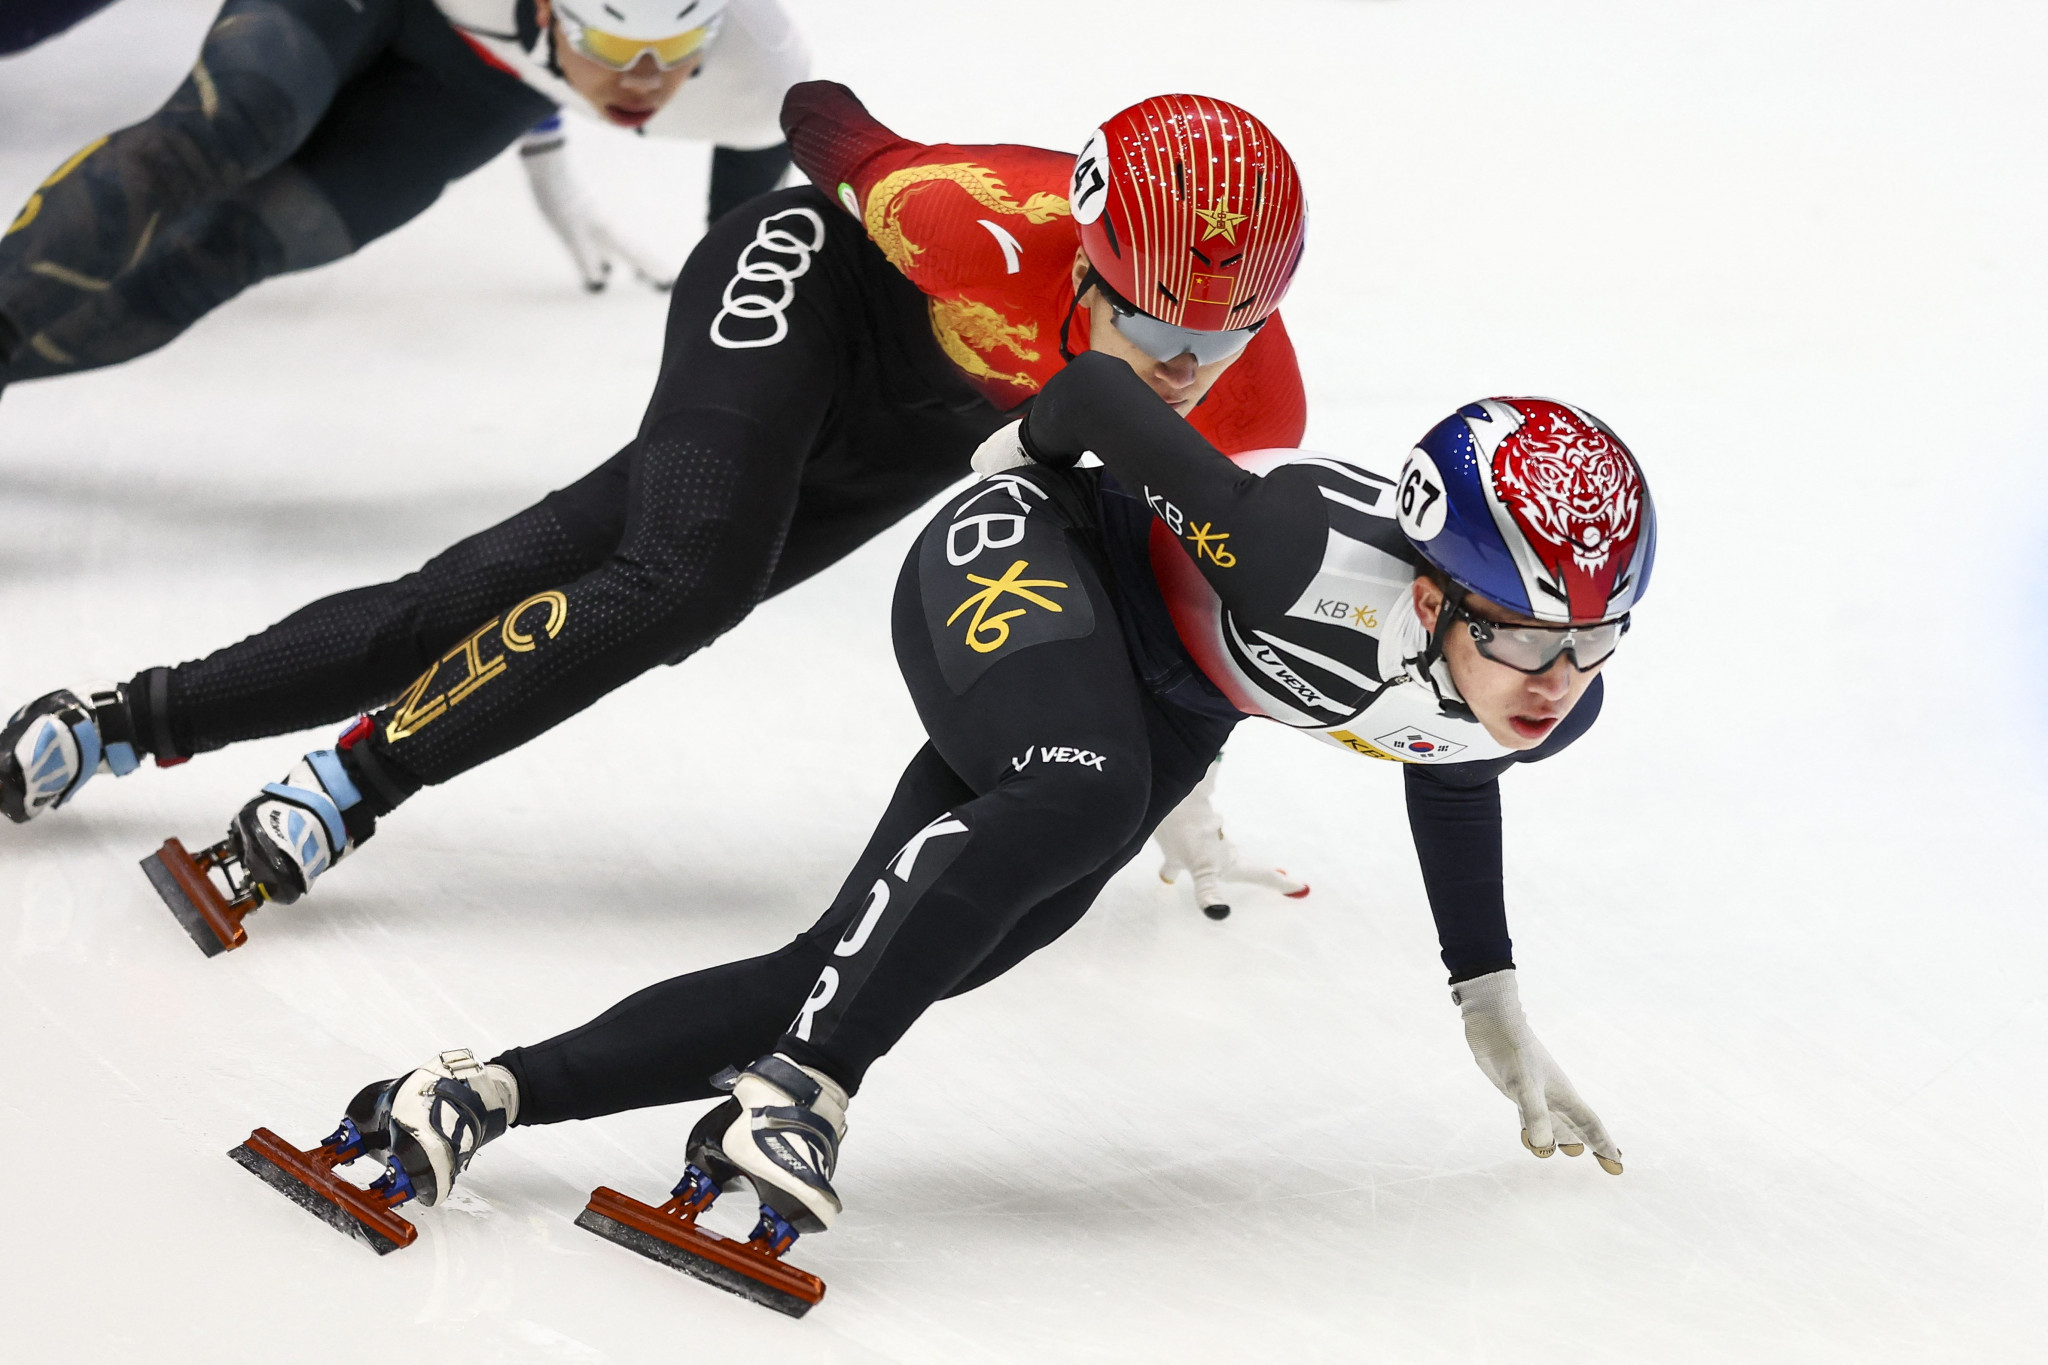 Hosts hoping to capitalise on home comfort at World Short Track Speed Skating Championships